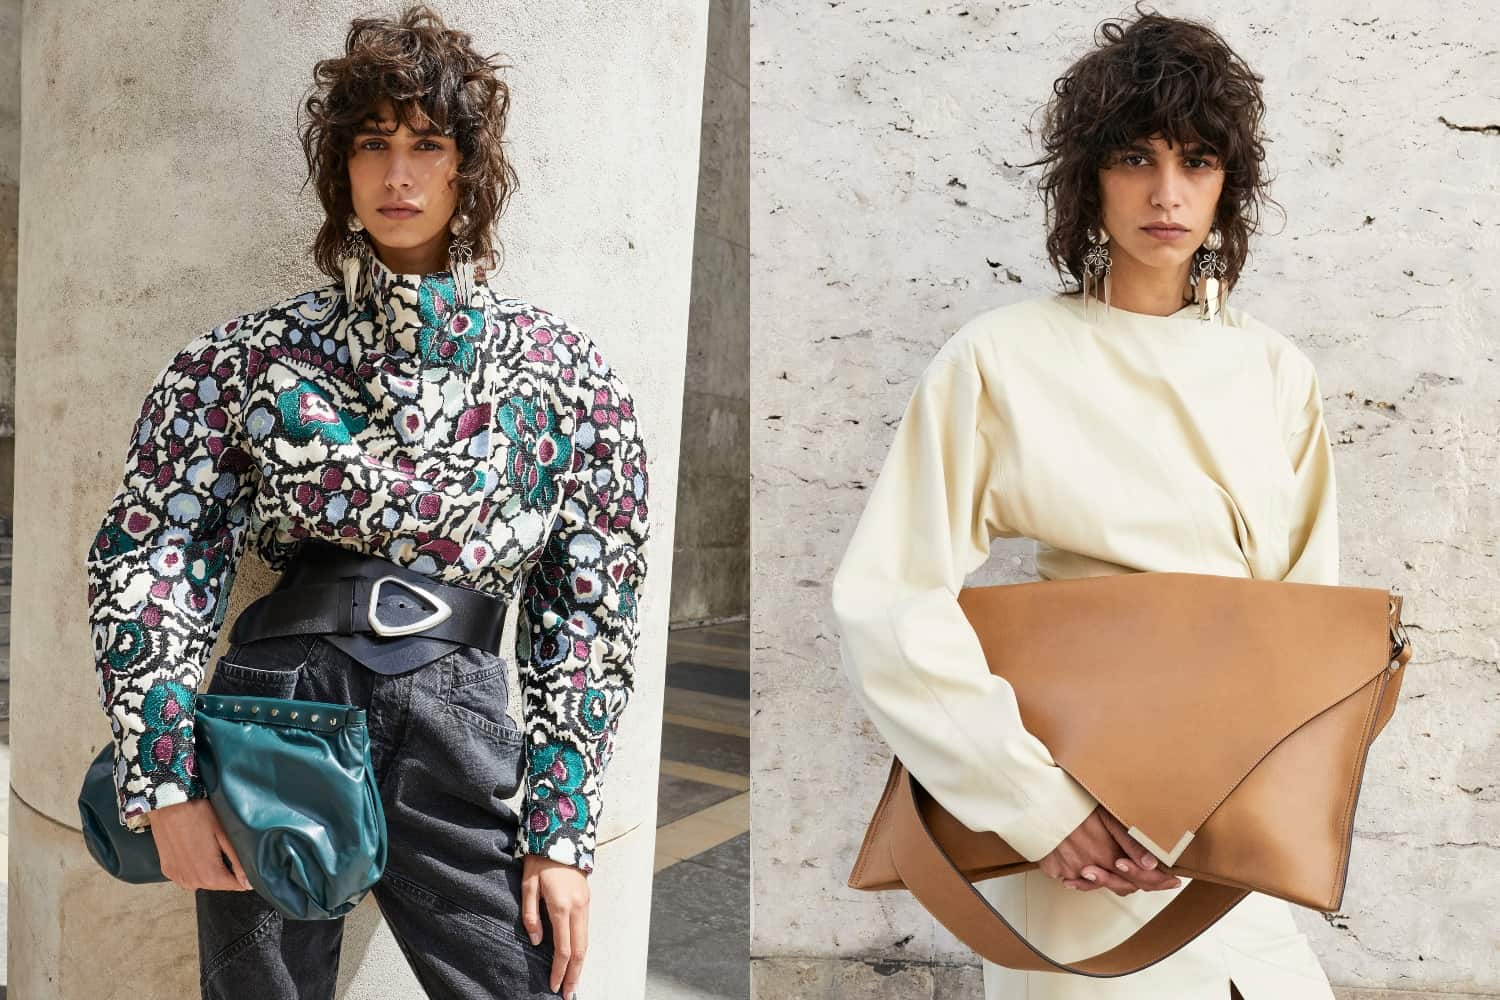 Isabel Marant's Latest Campaign is the Fall Style Inspiration You Need